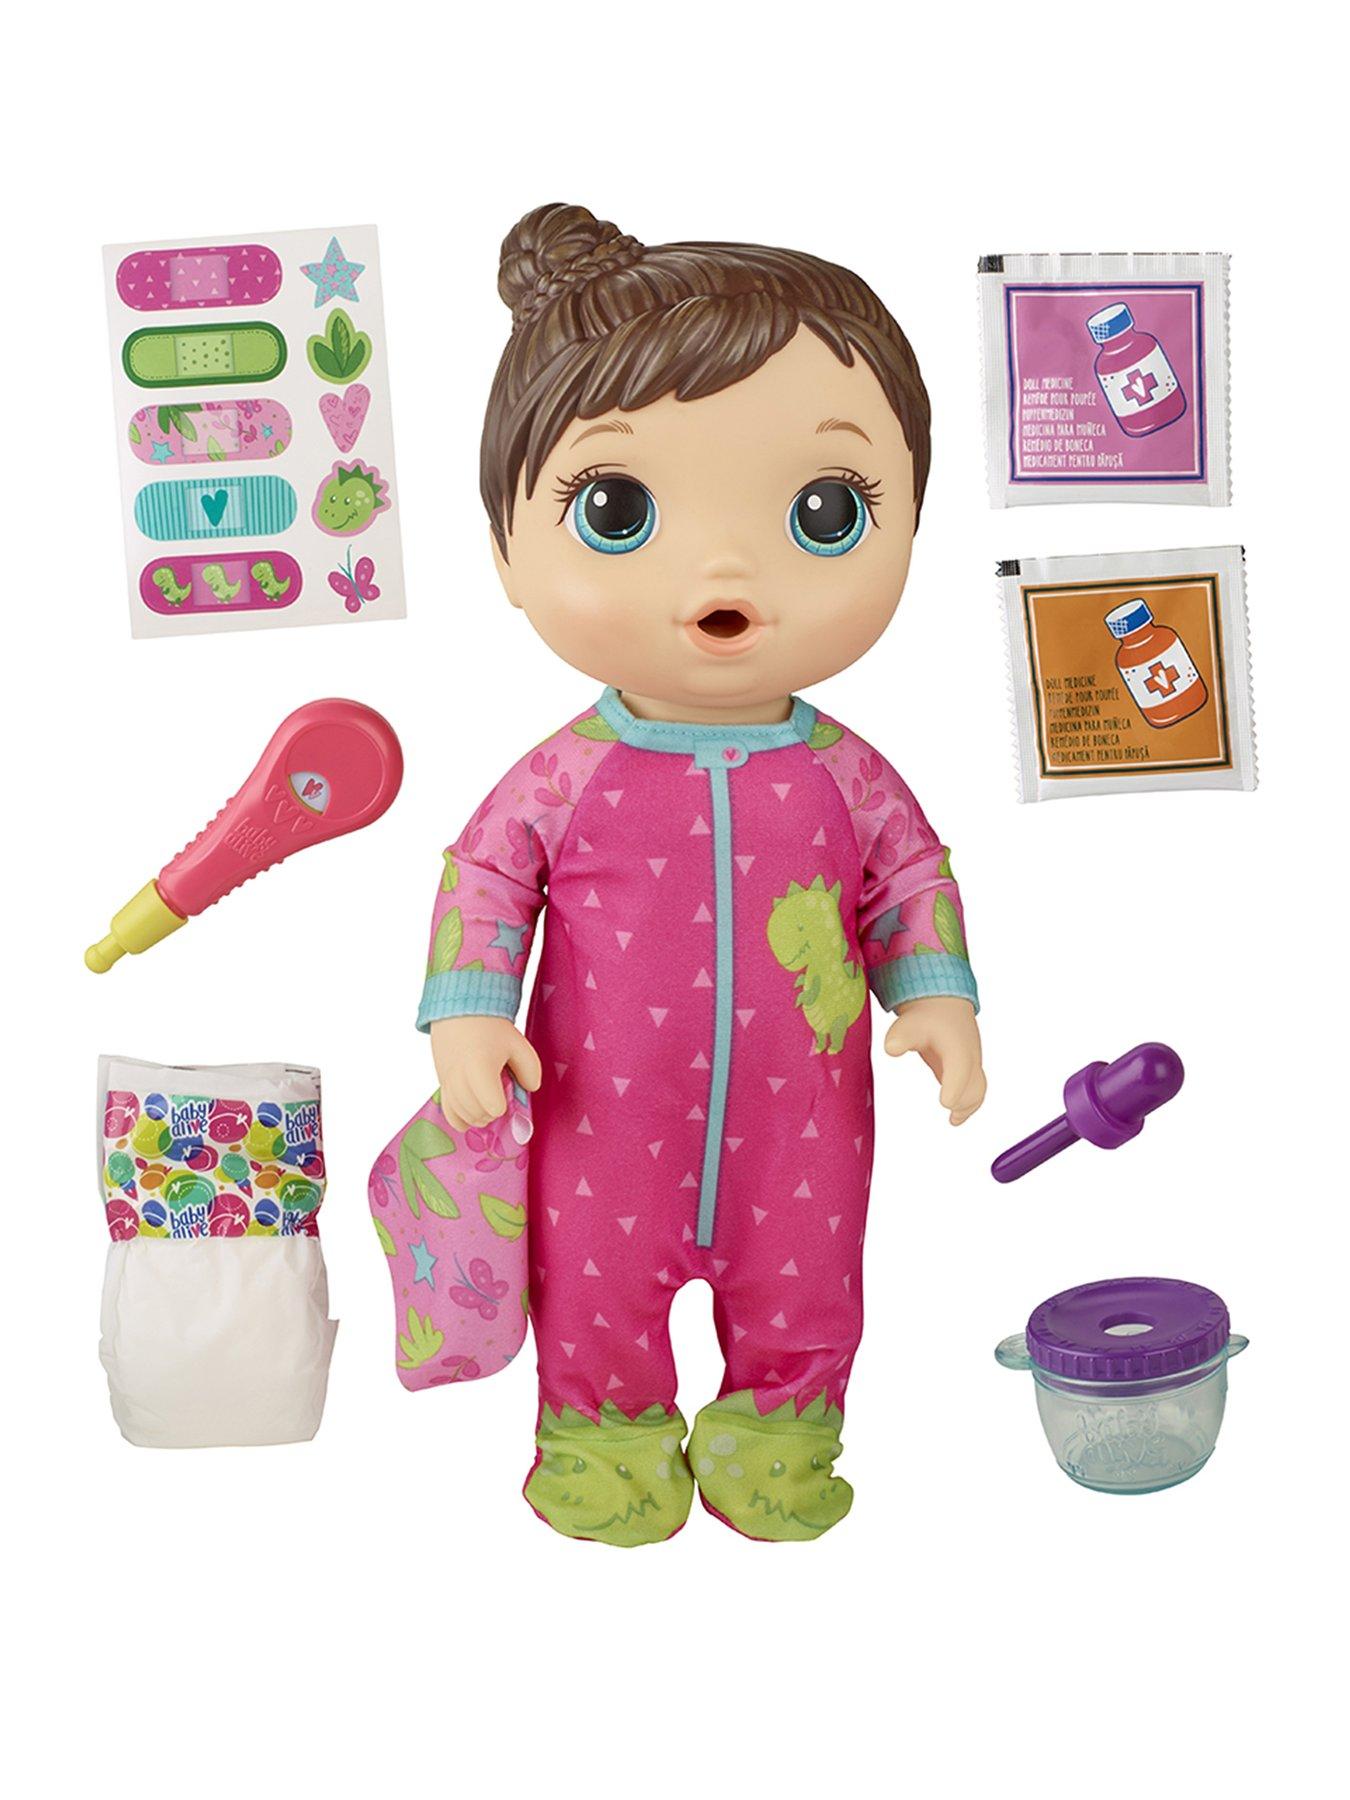 baby alive doll brown hair